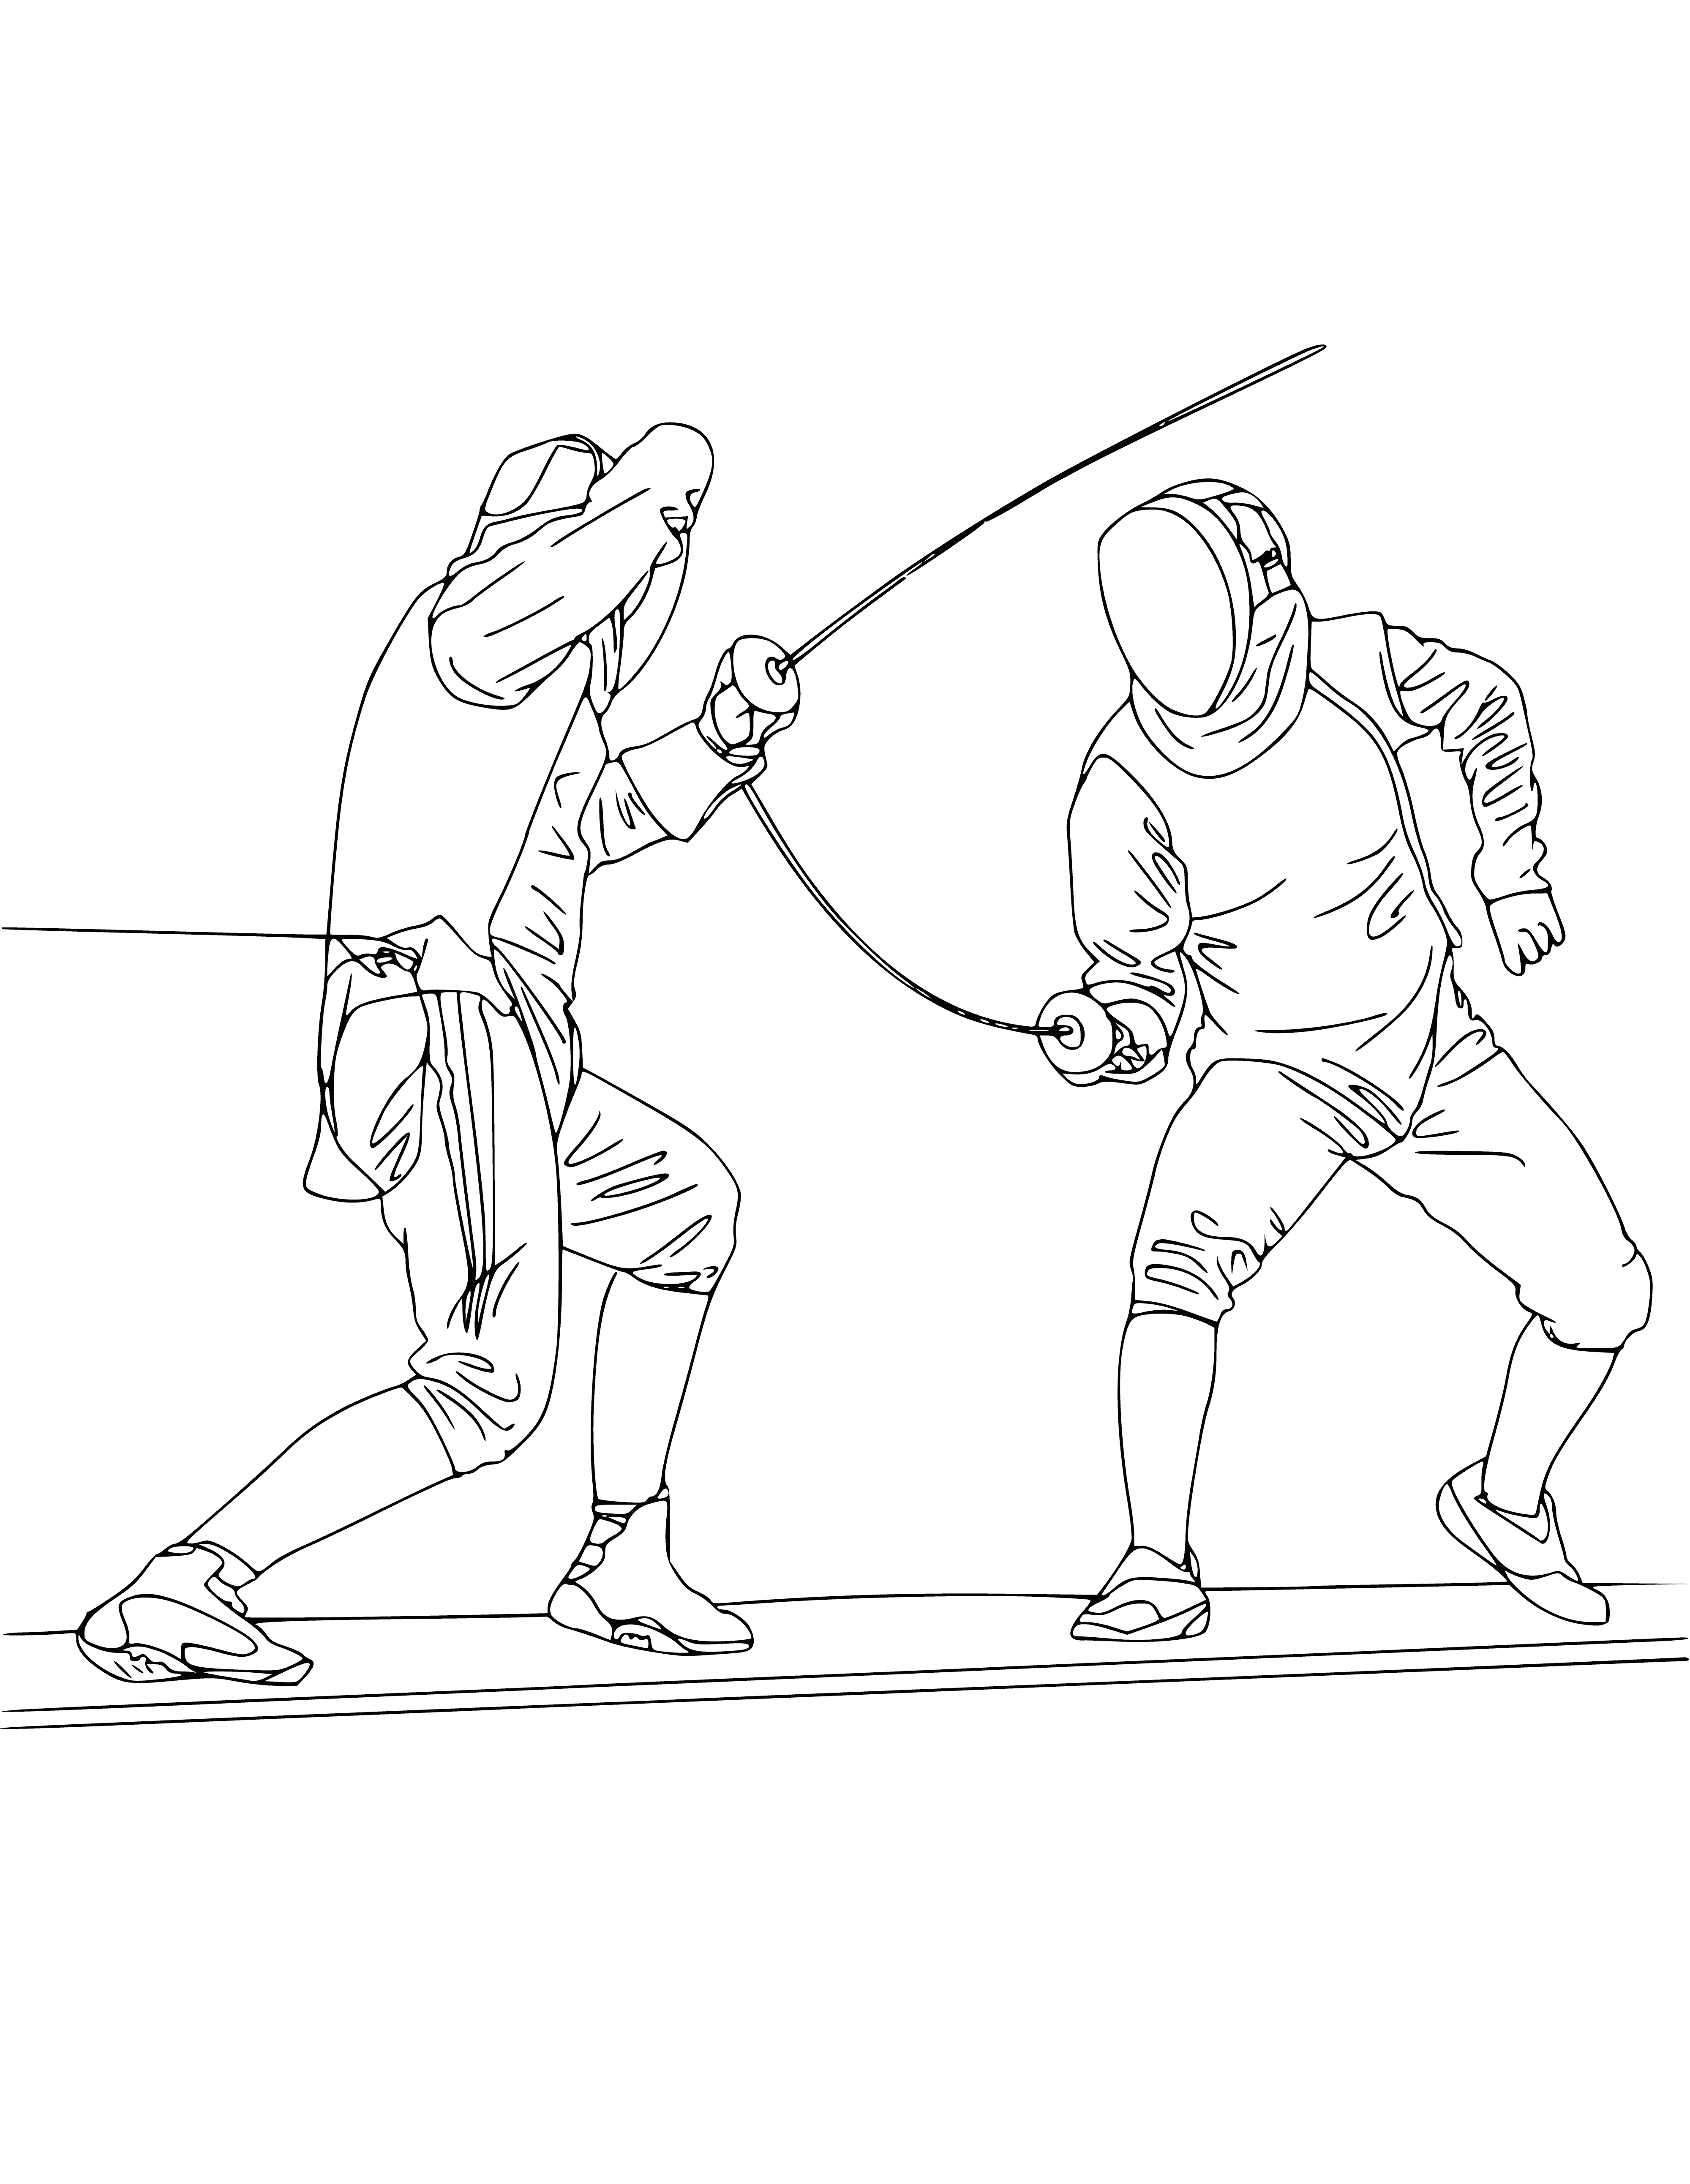 coloring page: Two people fencing on a strip, both in uniforms w/ masks & swords. Ready to compete! #fencing